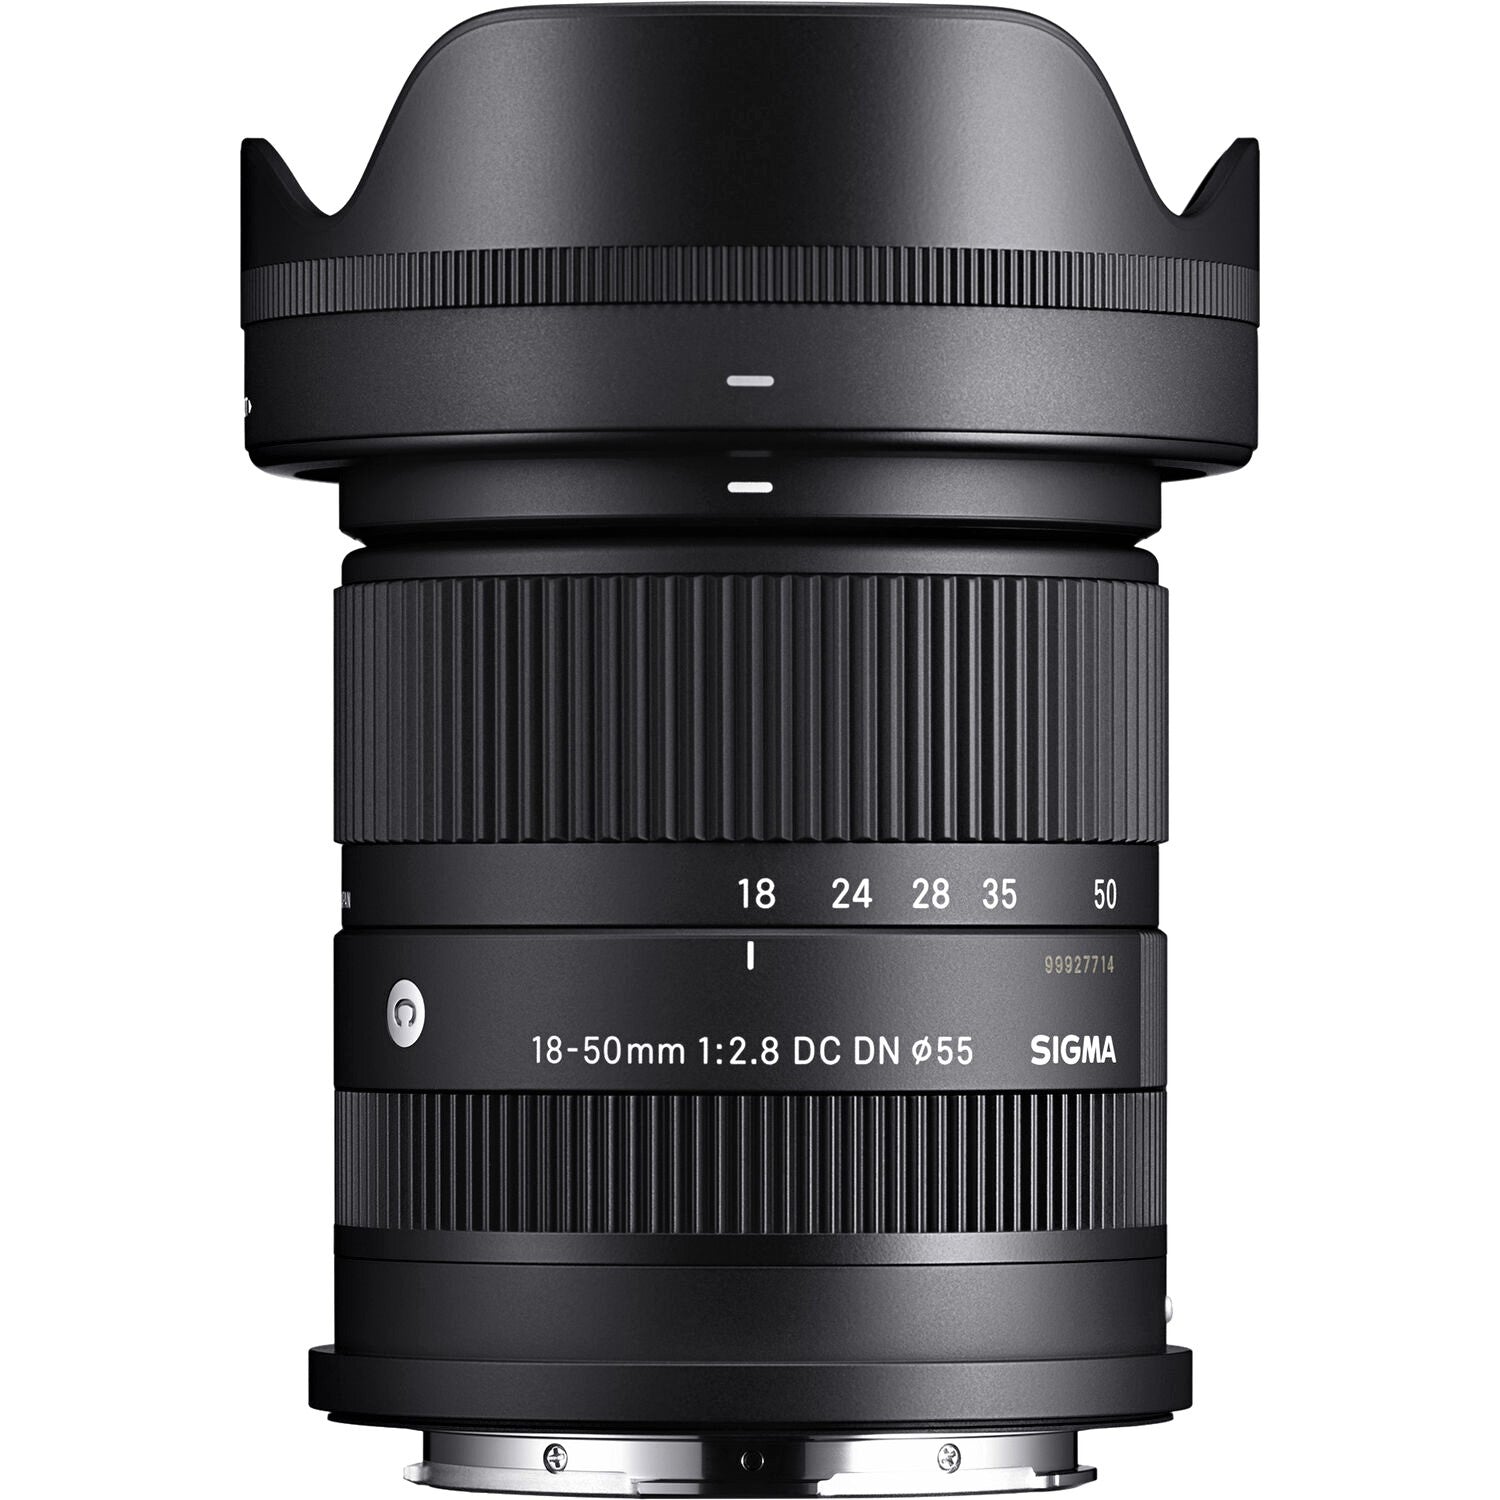 Sigma 18-50mm F2.8 DC DN Contemporary Lens (Leica L Mount) with Attached Lens Hood on the Top